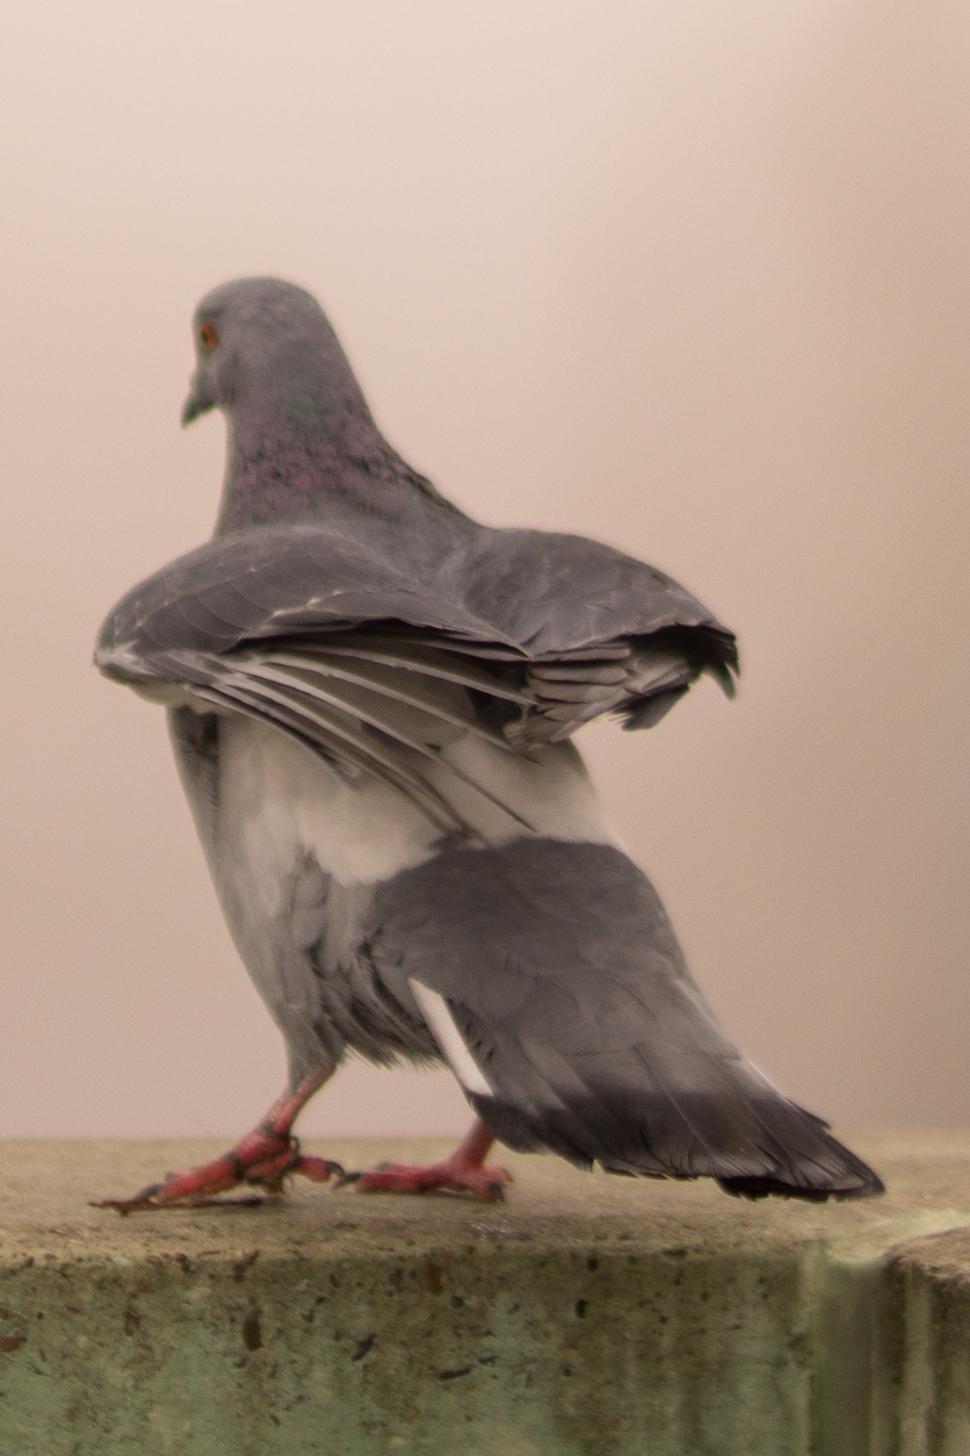 Free Image of Pigeon Sitting on Top of Cement Block 